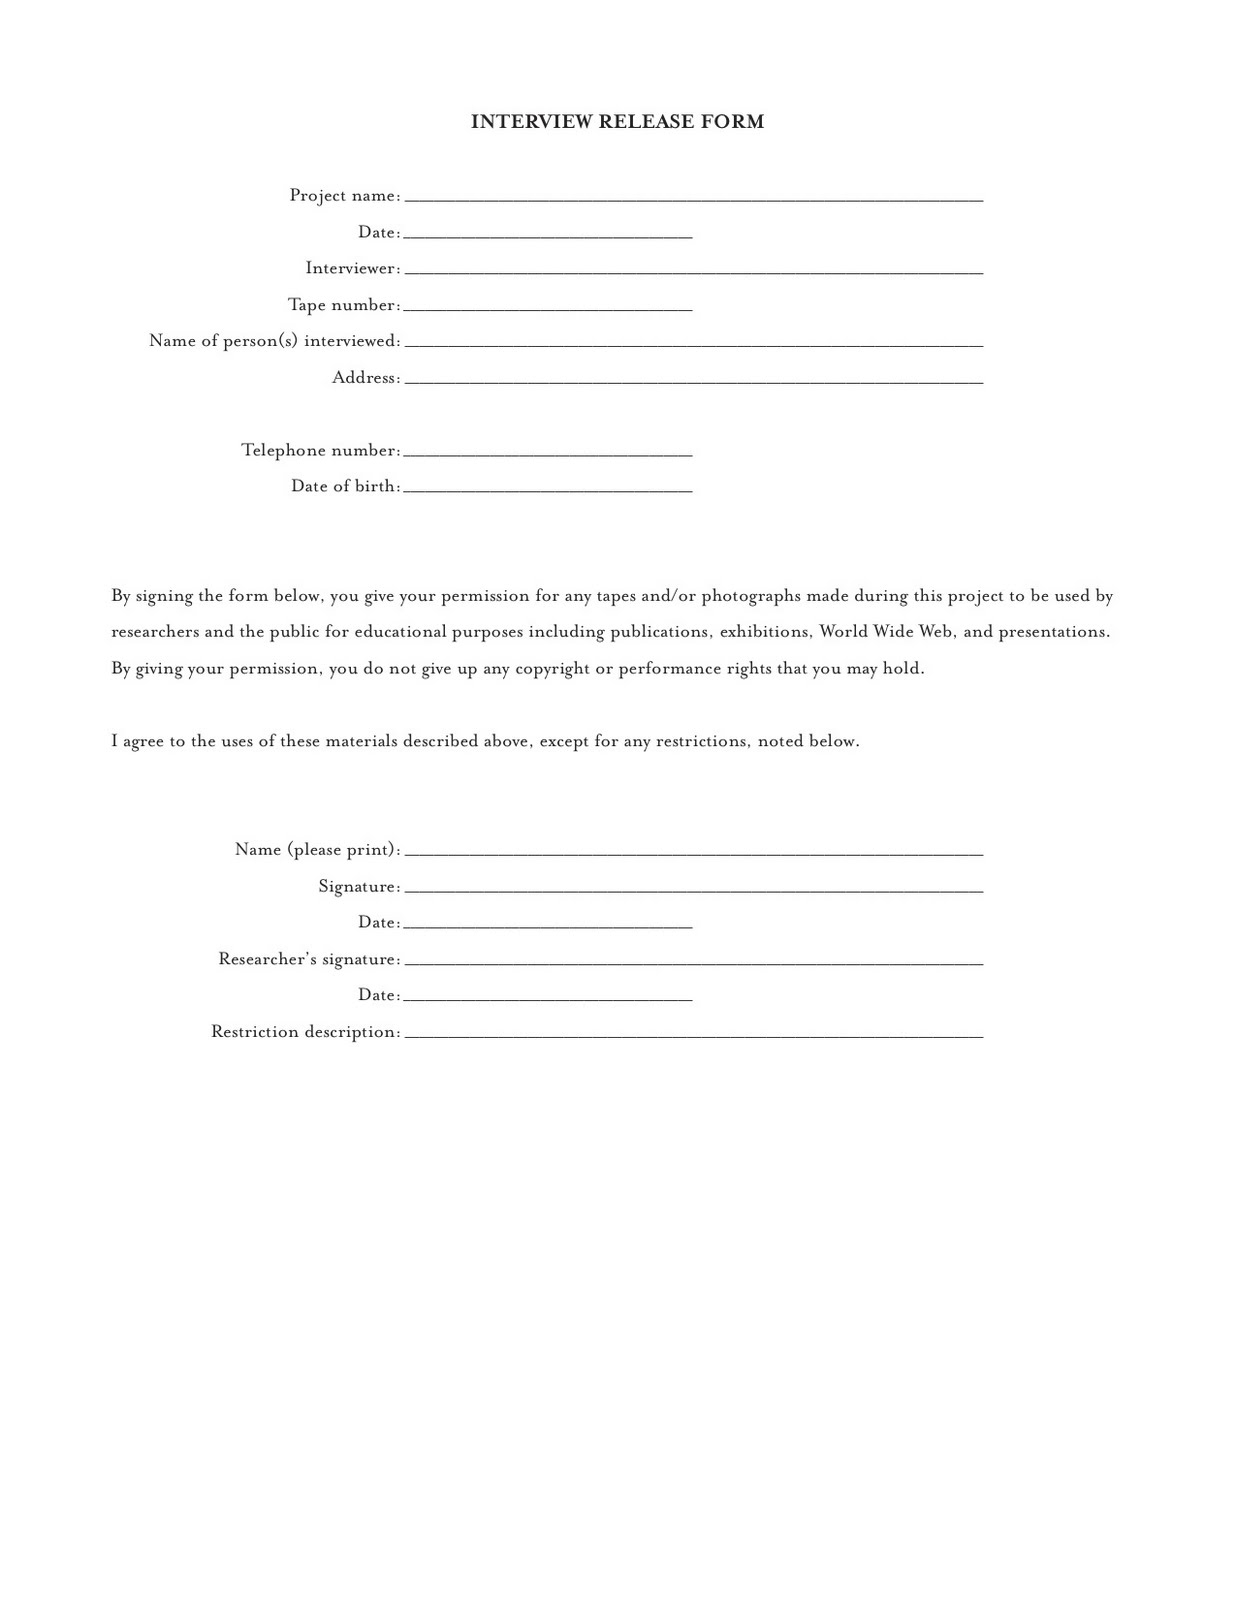 This Is My Blog s Name Interview Release Form